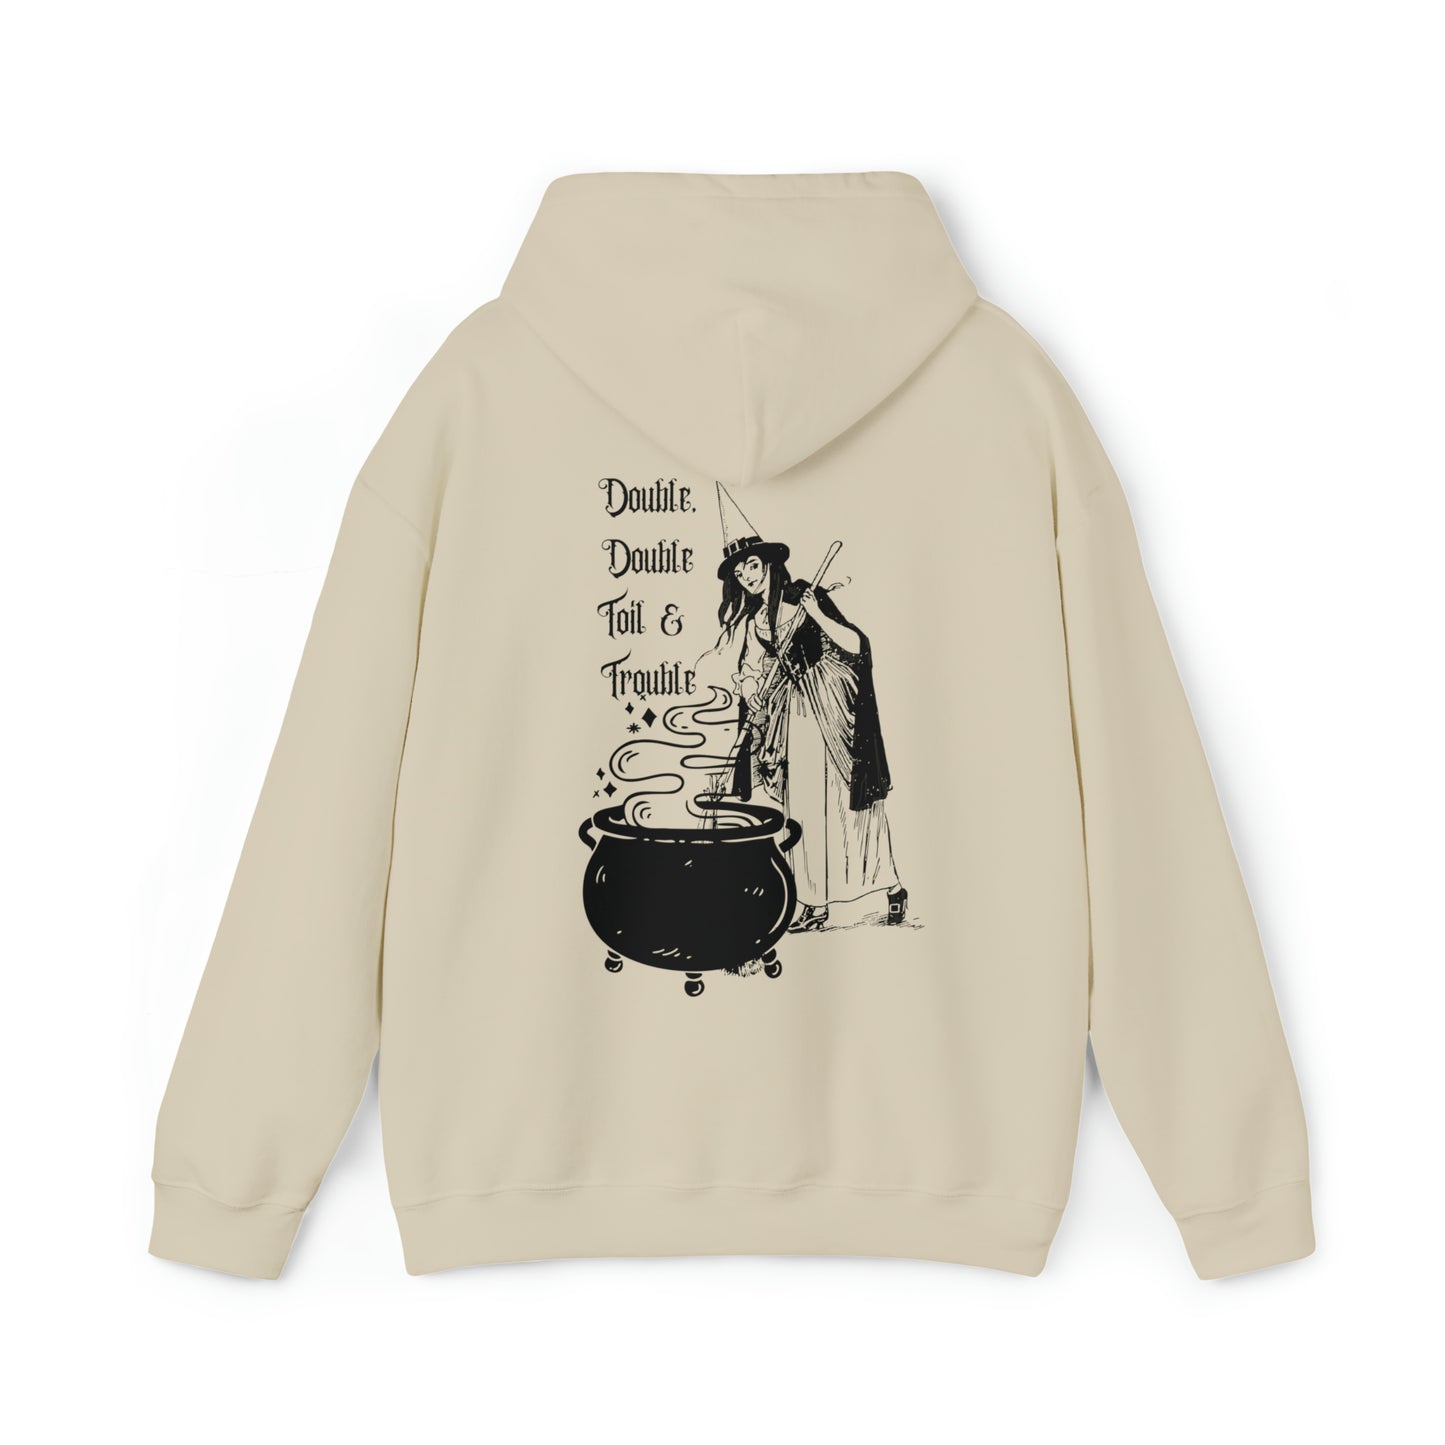 Double Double Toil and Trouble Hooded Sweatshirt